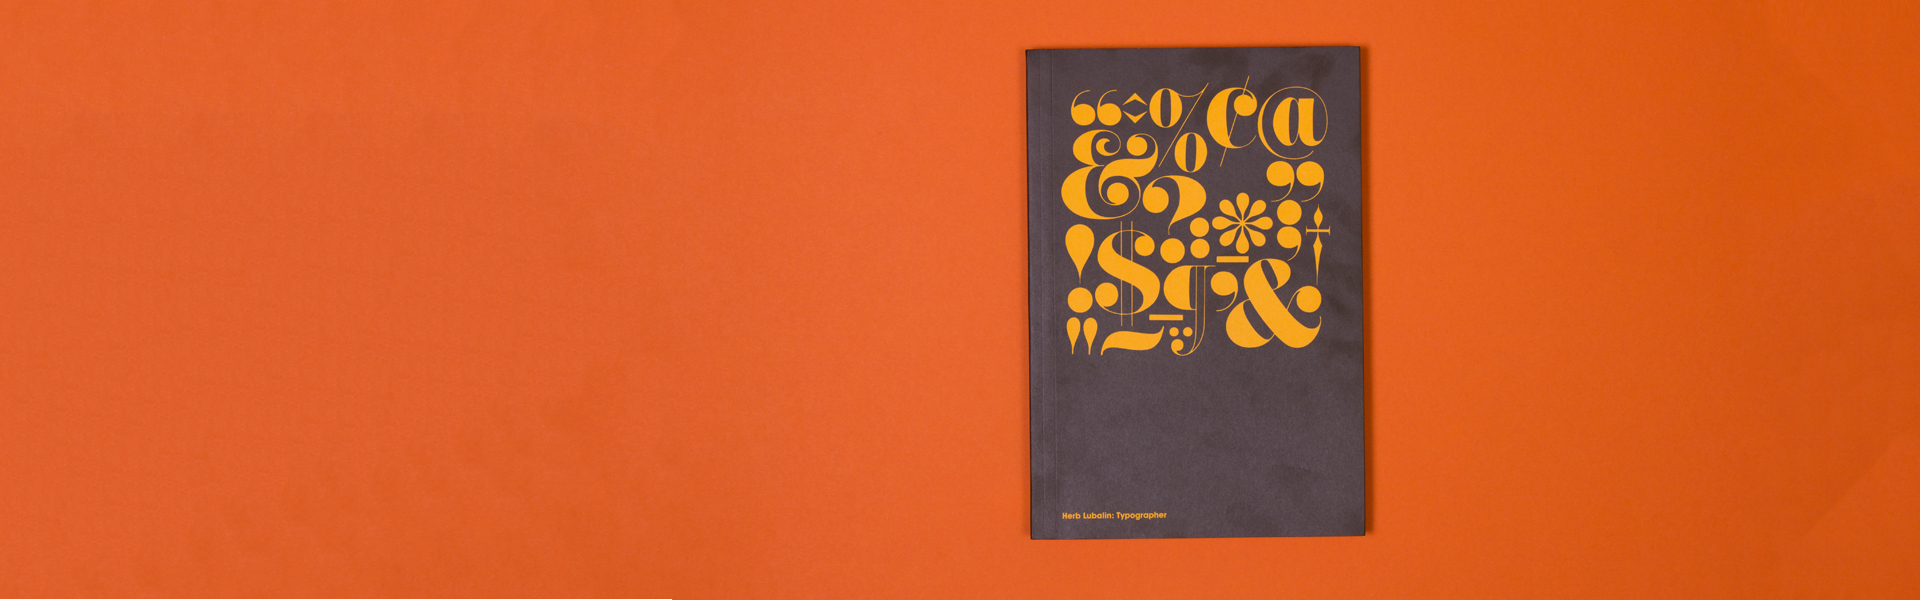 Thumbnail for: Shillington Book Club: Herb Lubalin Typographer by Unit Editions